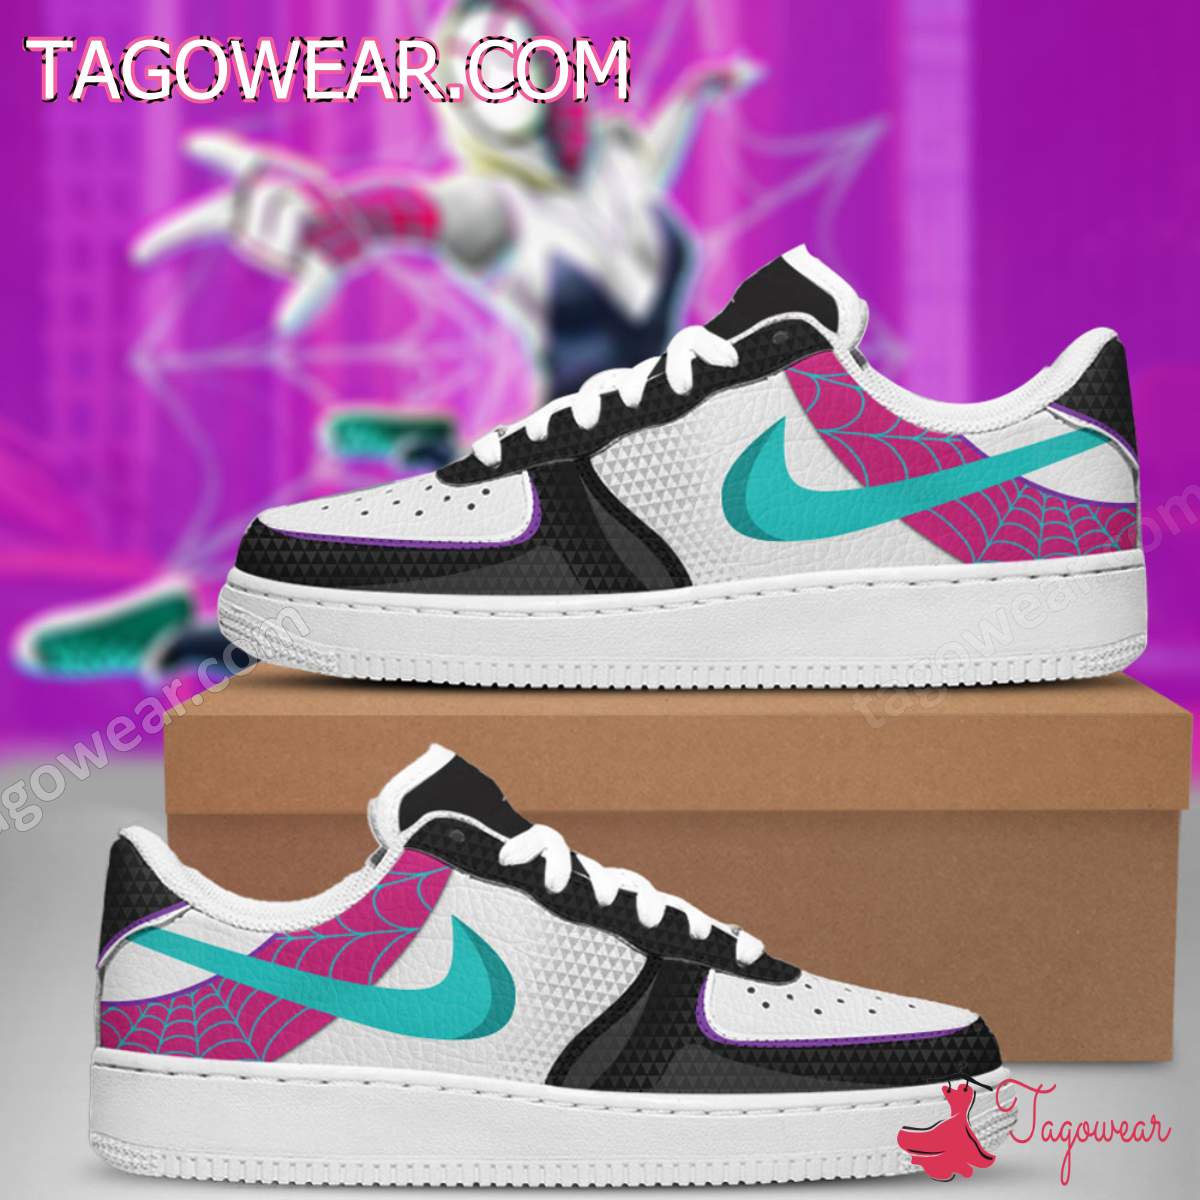 Spider-man Gwen Stacy Air Forces 1 Shoes